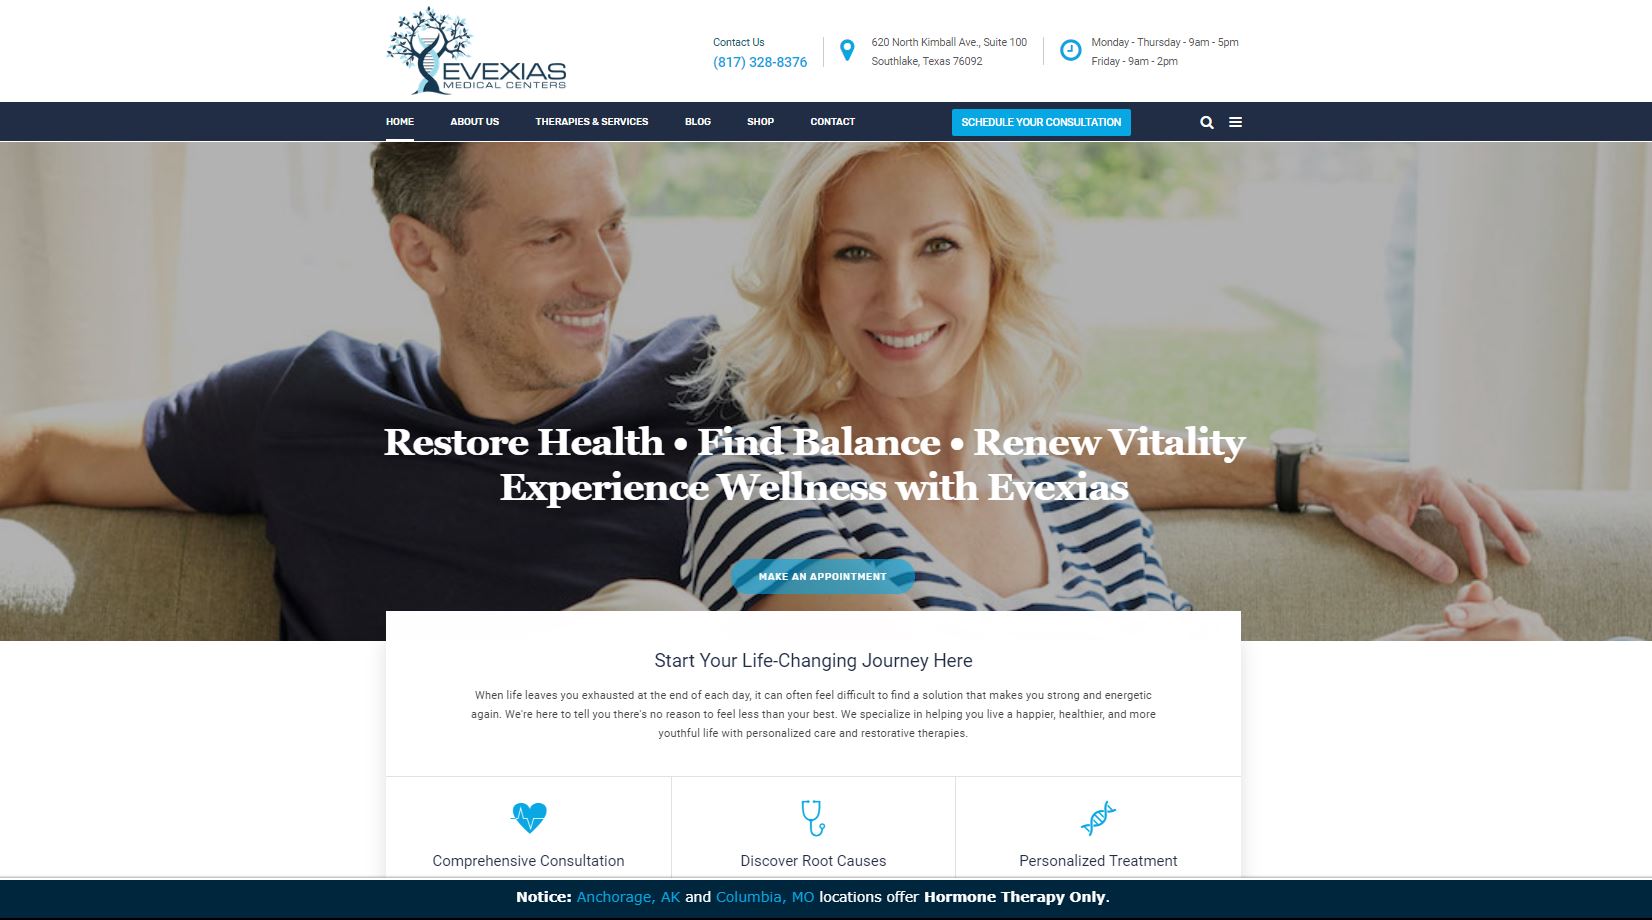 How EVEXIAS Medical Improved their Branding with a Website Update